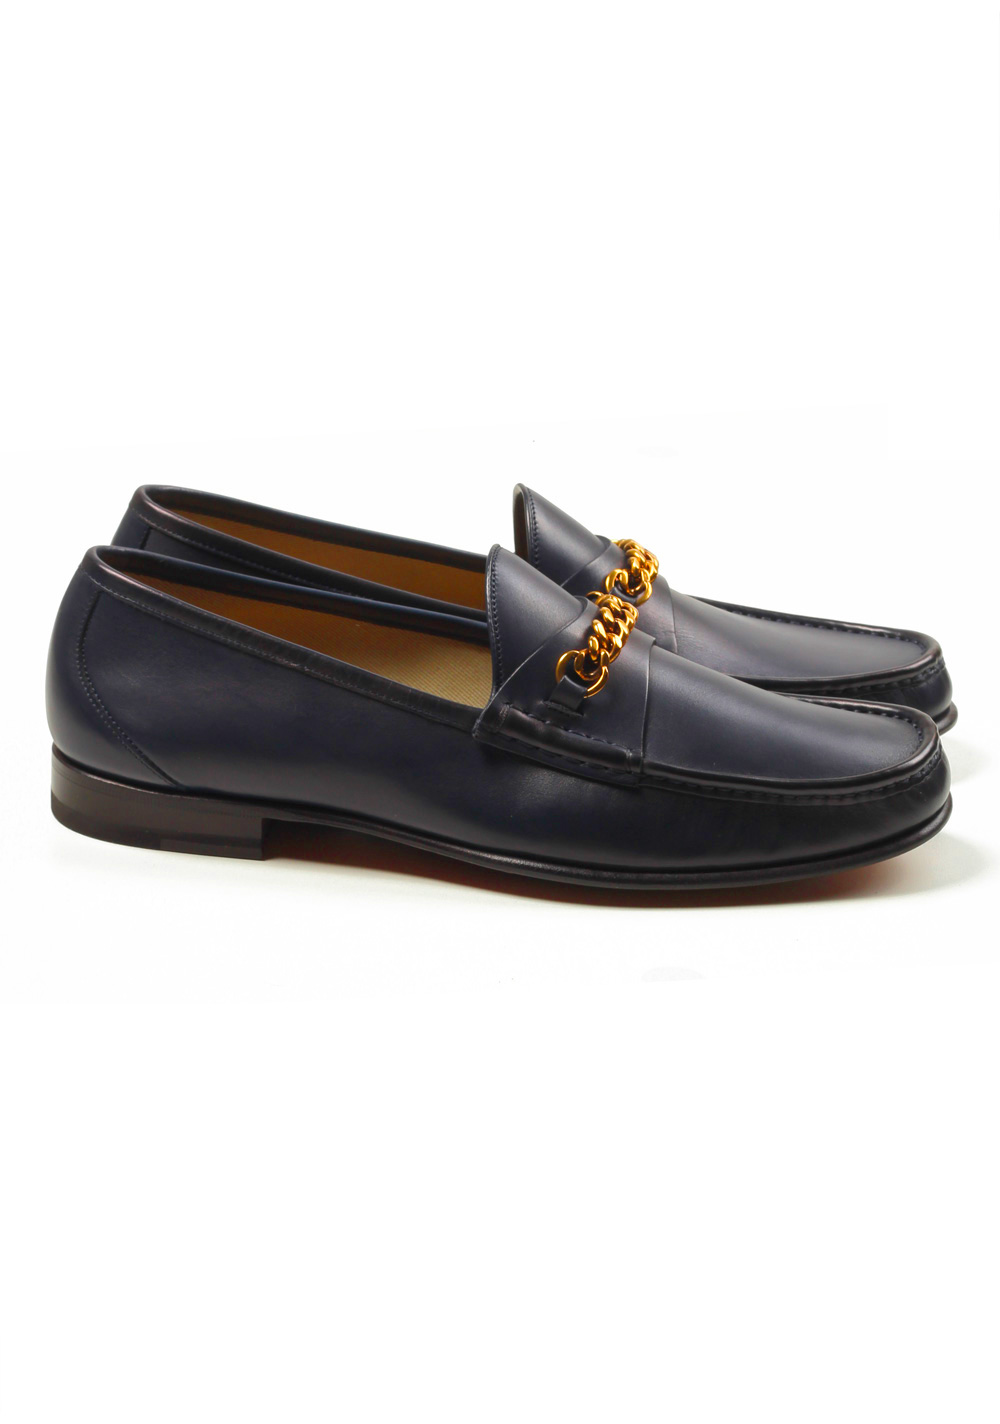 TOM FORD York Blue Leather Chain Loafers Shoes Size 7,5 UK / 8,5 U.S. | Costume Limité